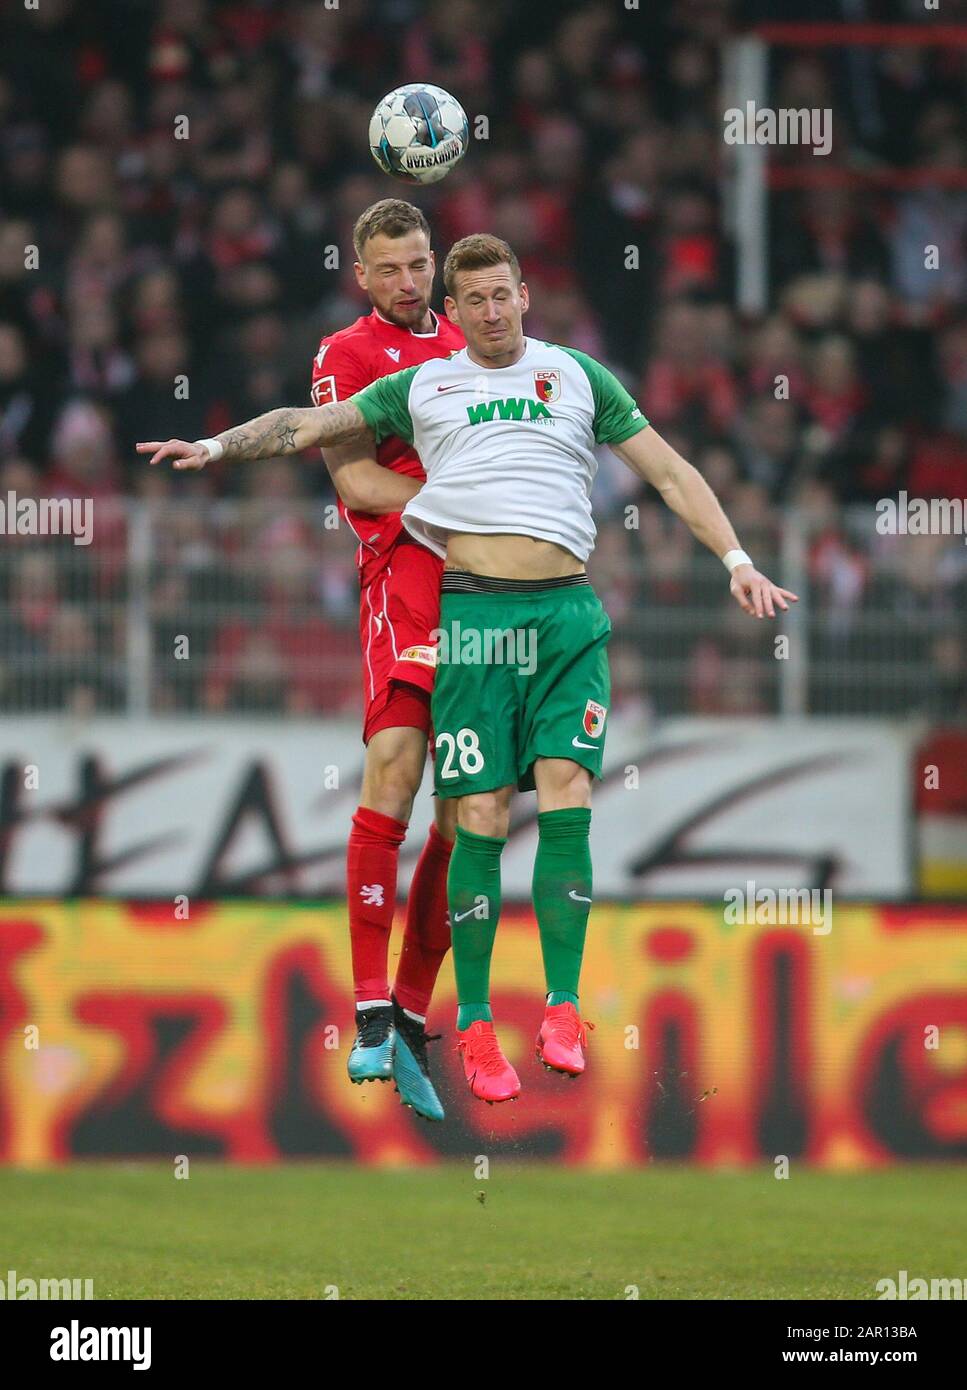 Berlin, Germany. 25th Jan, 2020. Football: Bundesliga, 1st FC Union Berlin - FC Augsburg, 19th matchday, An der Alten Försterei stadium. Berlin's Marvin Friedrich (l) jumps to a header against Andre Hahn of FC Augsburg. Credit: Andreas Gora/dpa - IMPORTANT NOTE: In accordance with the regulations of the DFL Deutsche Fußball Liga and the DFB Deutscher Fußball-Bund, it is prohibited to exploit or have exploited in the stadium and/or from the game taken photographs in the form of sequence images and/or video-like photo series./dpa/Alamy Live News Credit: dpa picture alliance/Alamy Live News Stock Photo